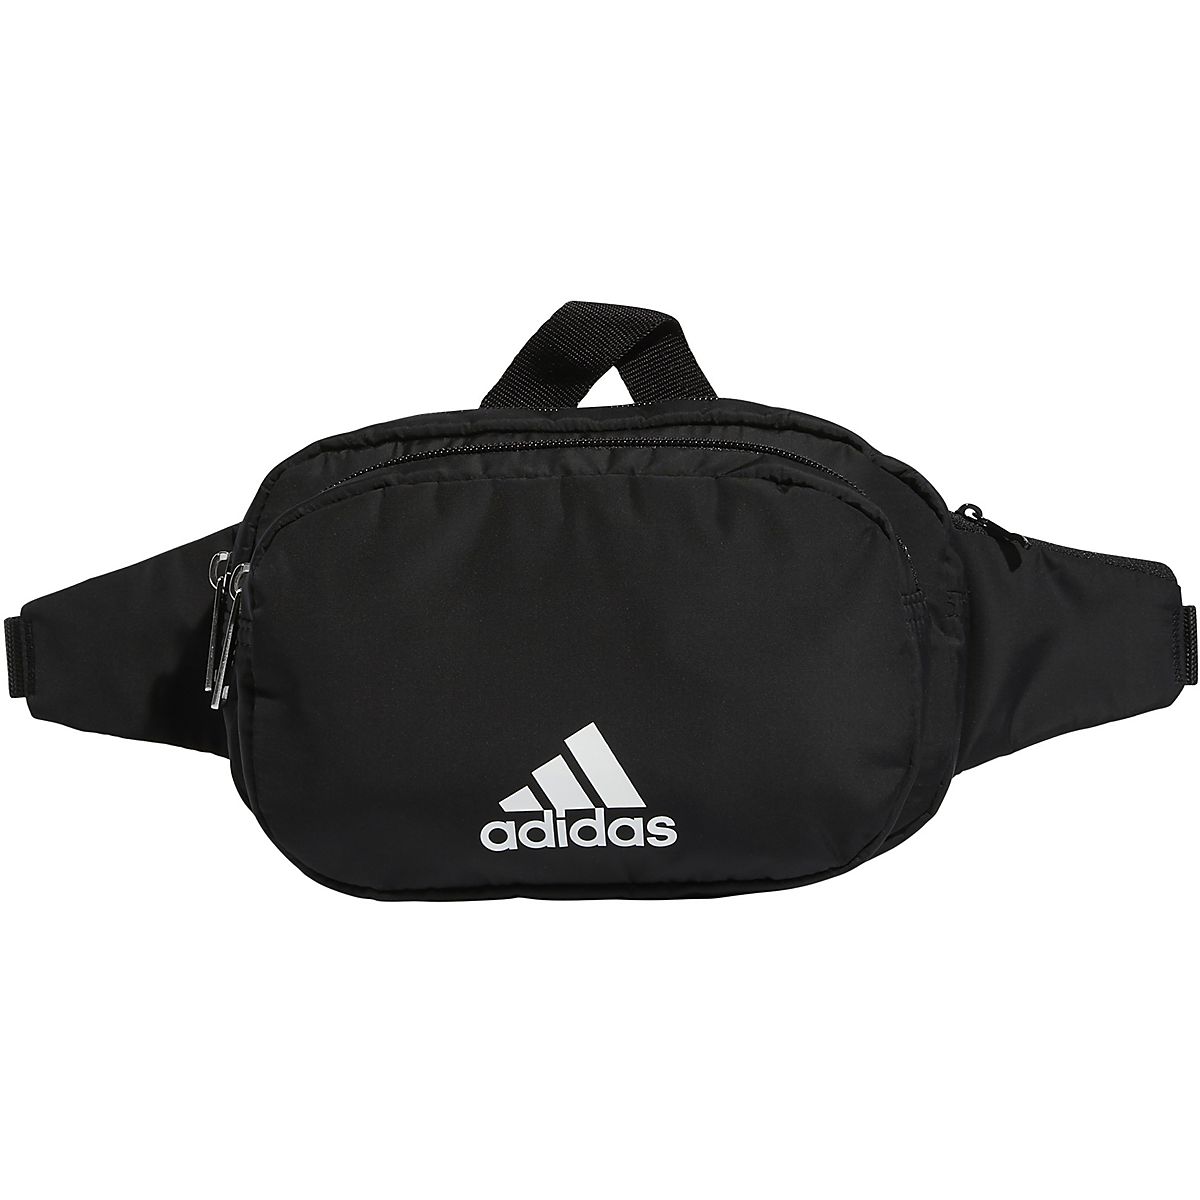 adidas Must Have Waist Pack | Free Shipping at Academy